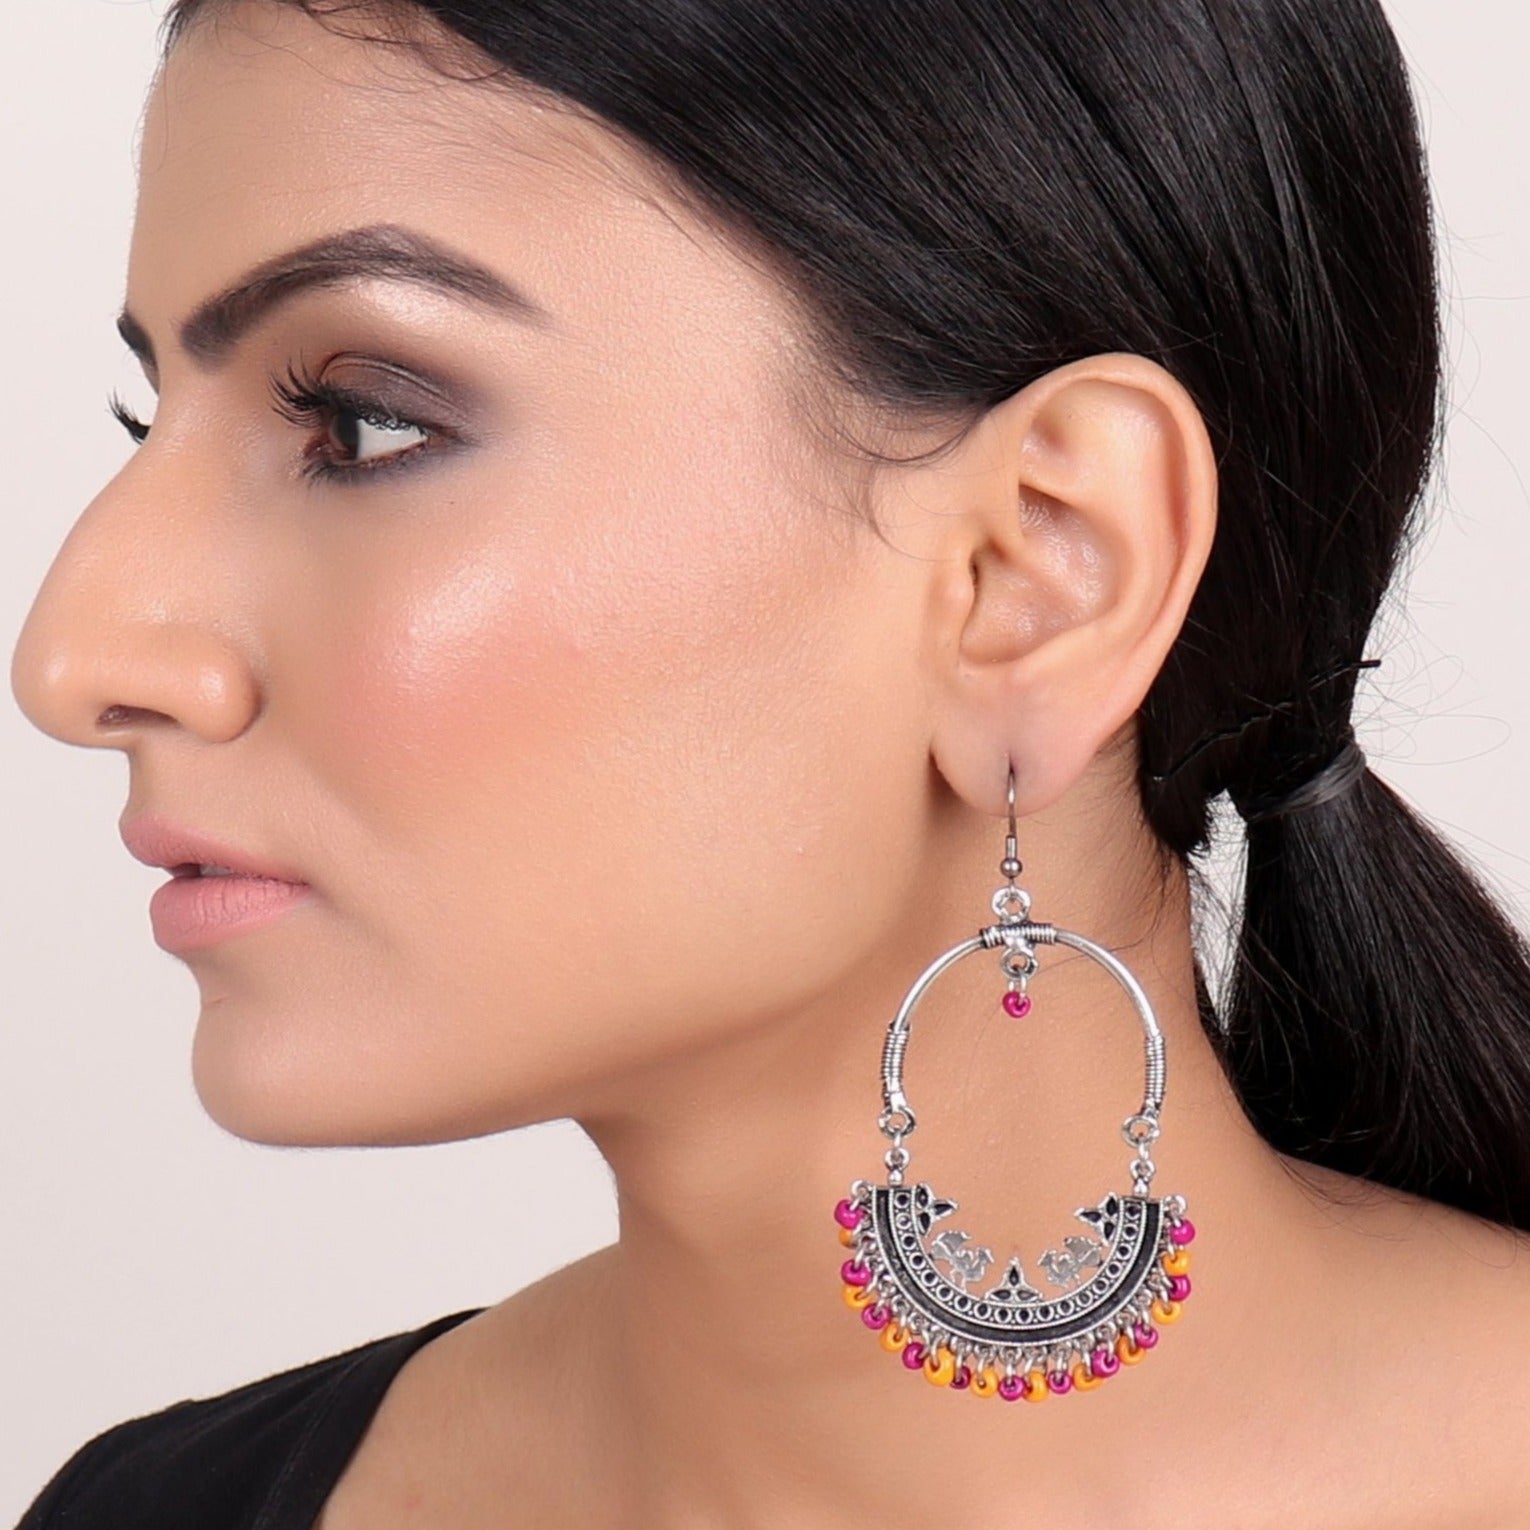 Earrings,Afghan Inspiration Baali with pink & orange beads - Cippele Multi Store